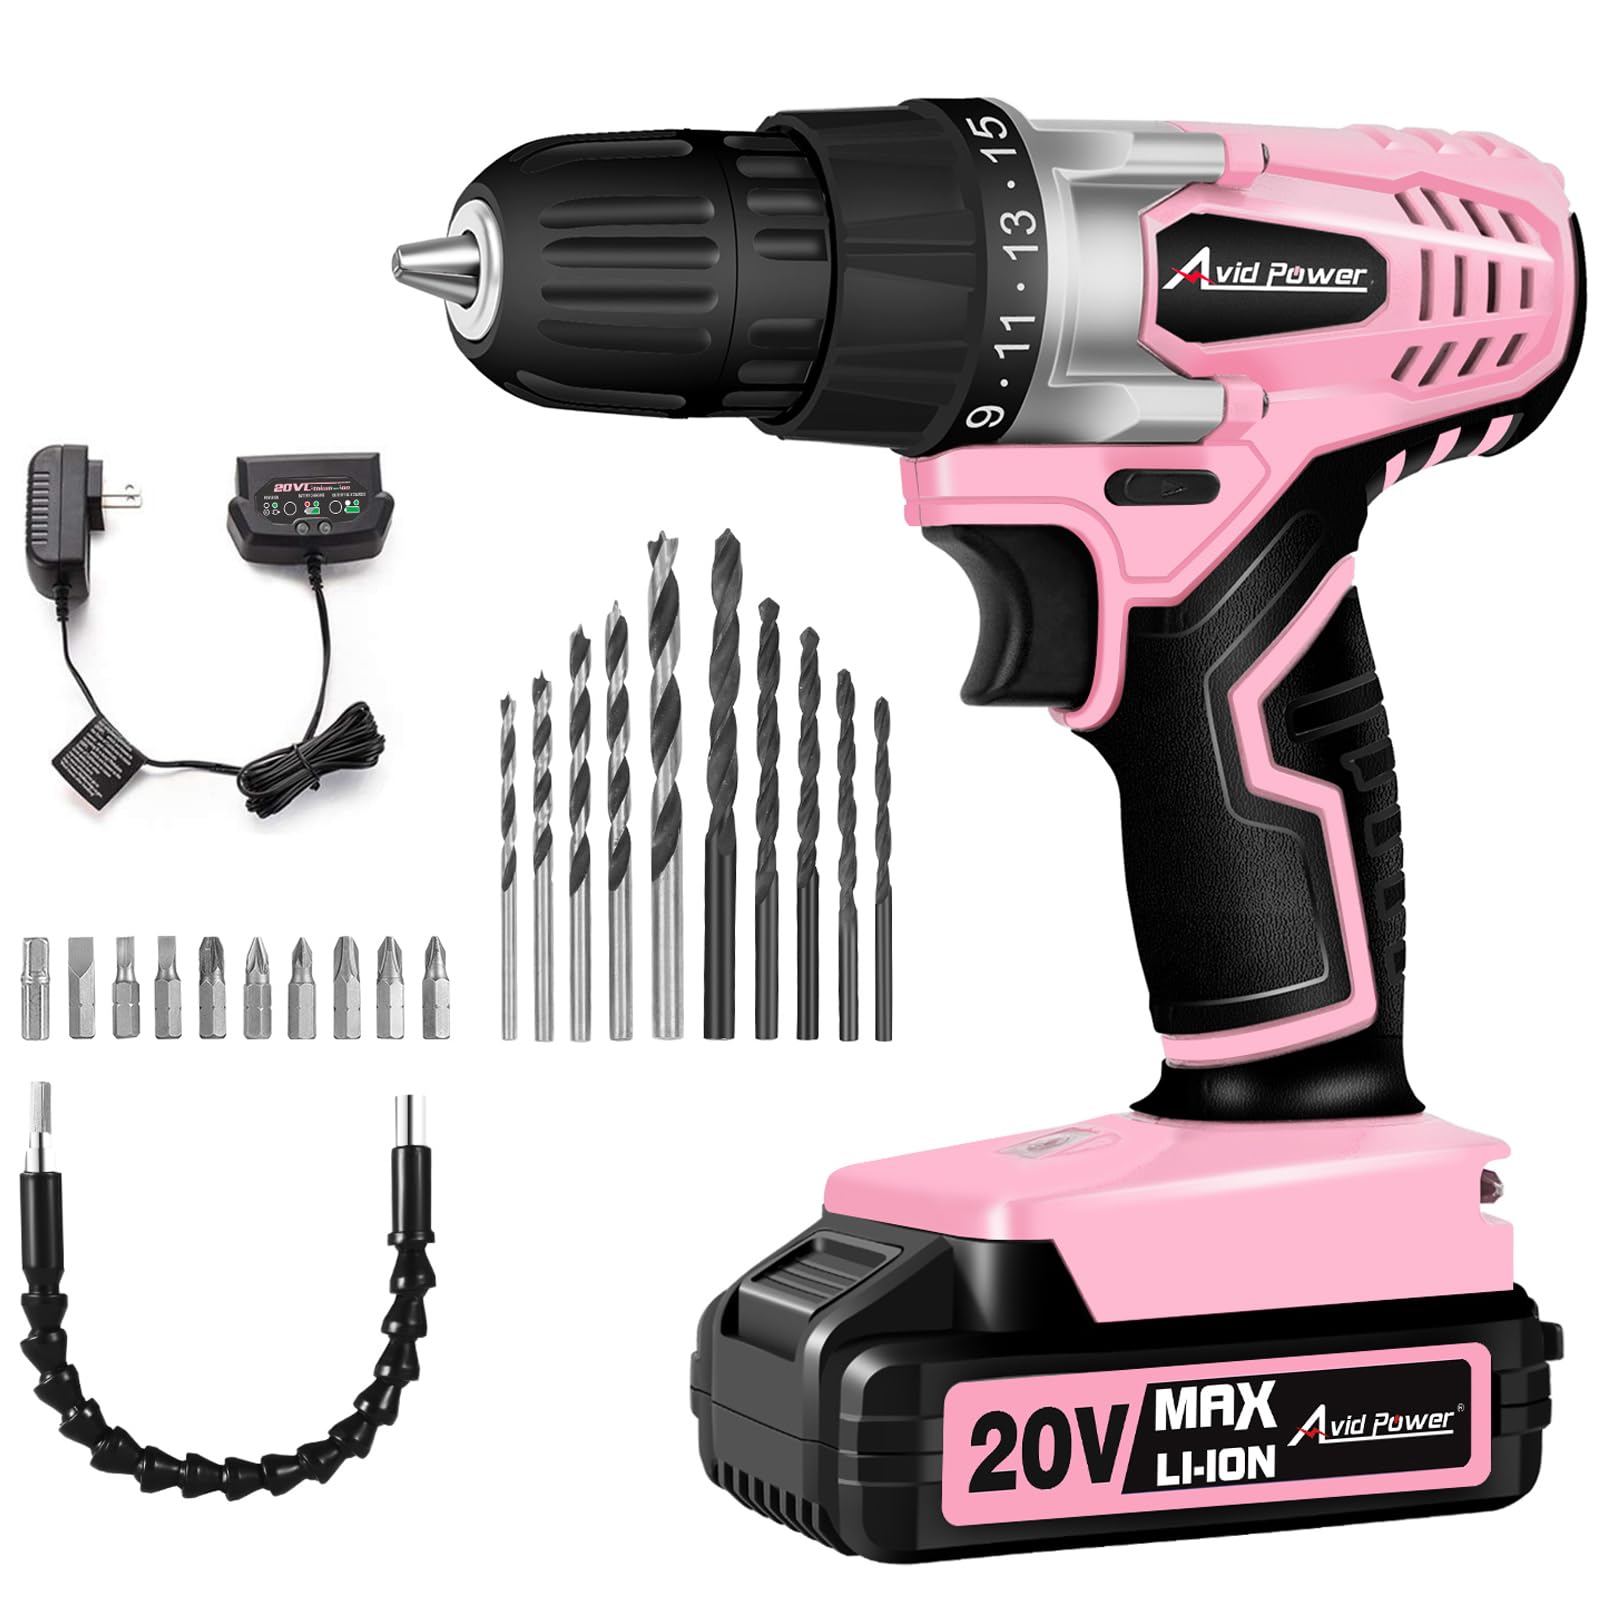 AVID POWER 20V MAX Lithium lon Cordless Drill Set, Power Drill Kit with Battery and Charger, 3/8-Inch Keyless Chuck, Variable Speed, 16 Position and 22pcs Drill Bits (Pink)